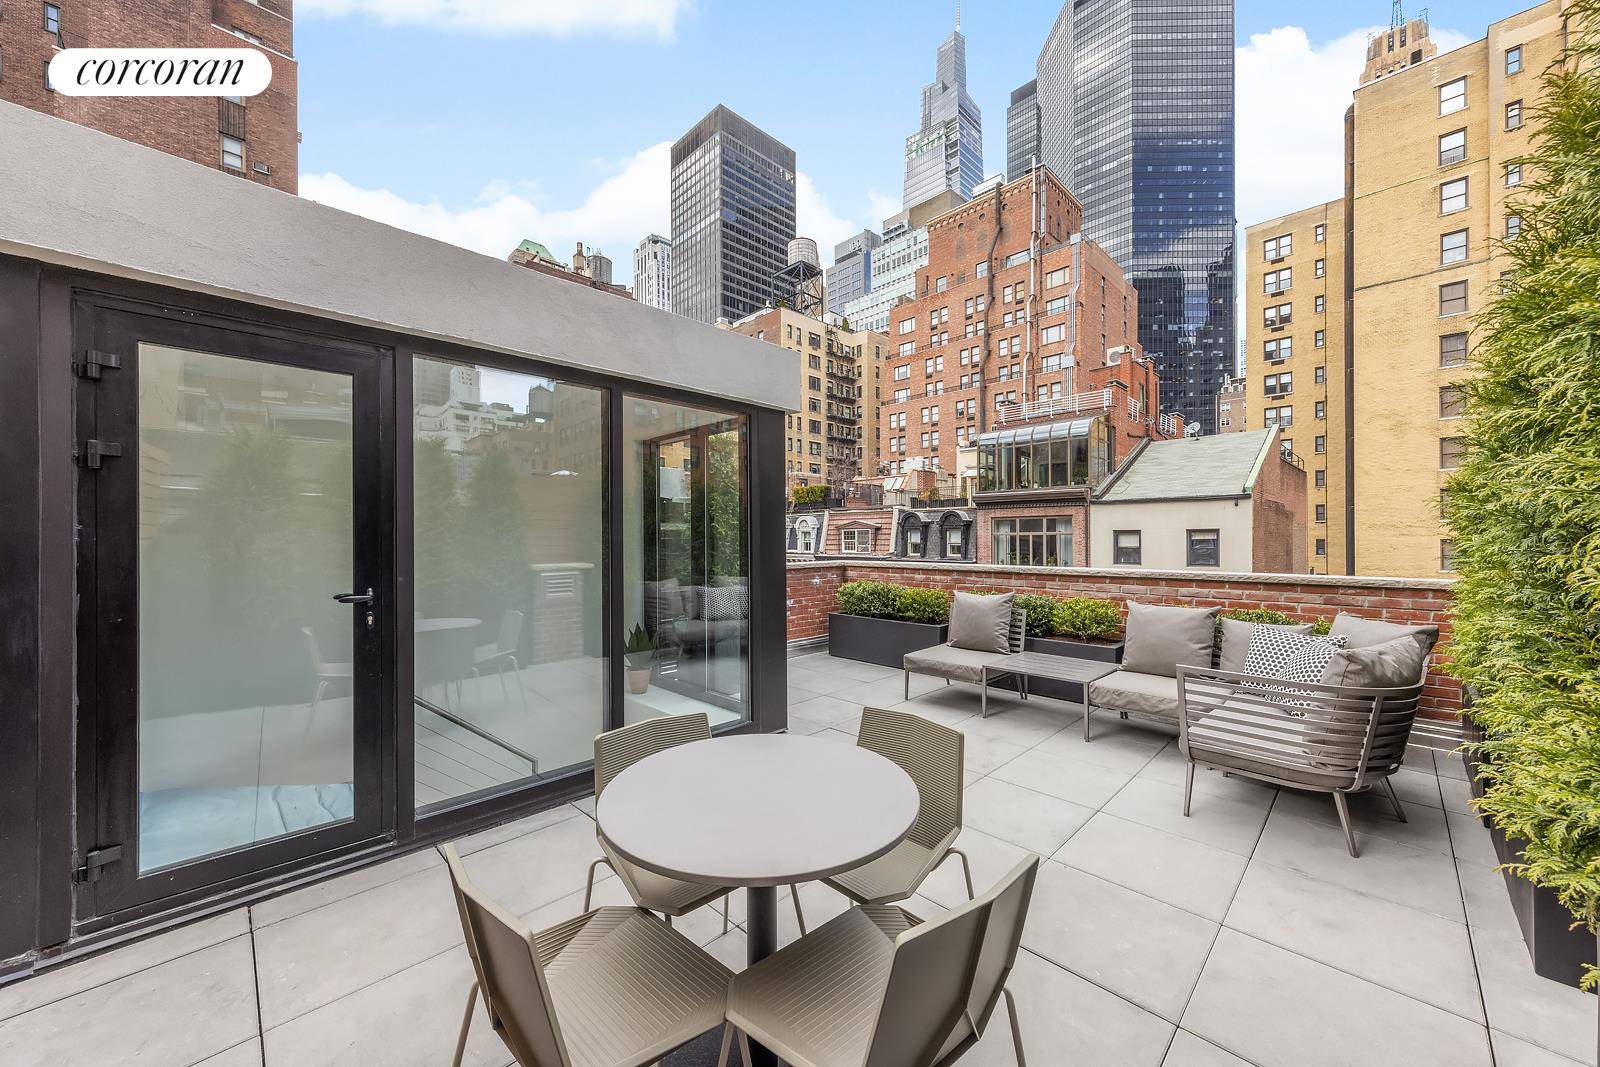 130 East 38th Street is a spectacular 4 story townhouse with a finished lower level suite and fabulous roof terrace, located off Park Avenue on a quiet, tree lined street, ...